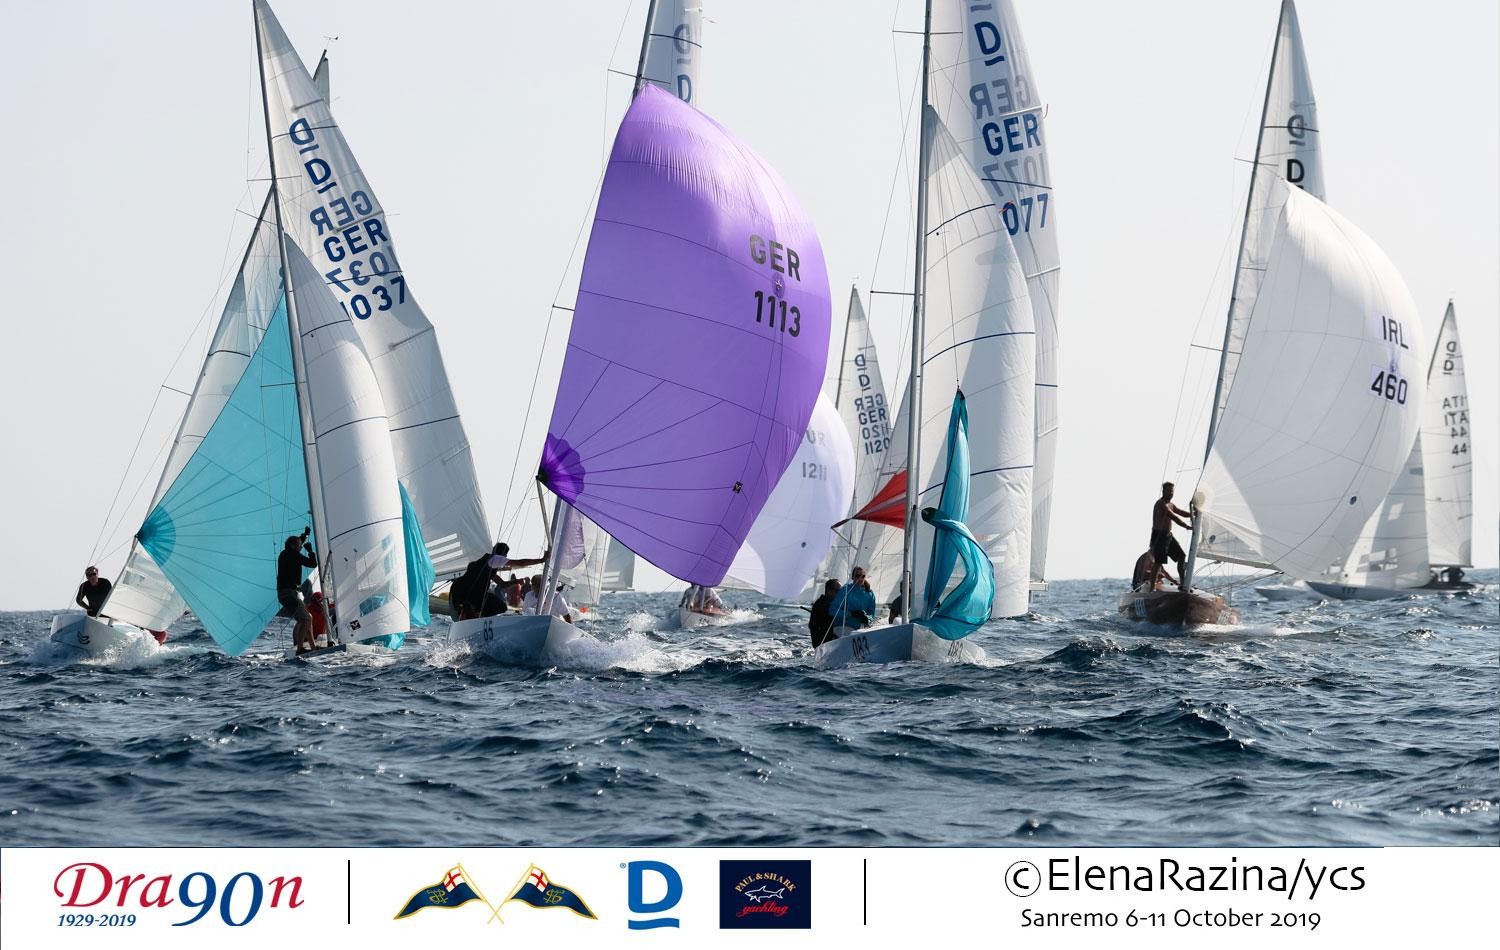 Il danese Out of Bounce vince la Dragon 90th Anniversary Regatta powered by Paul&Shark